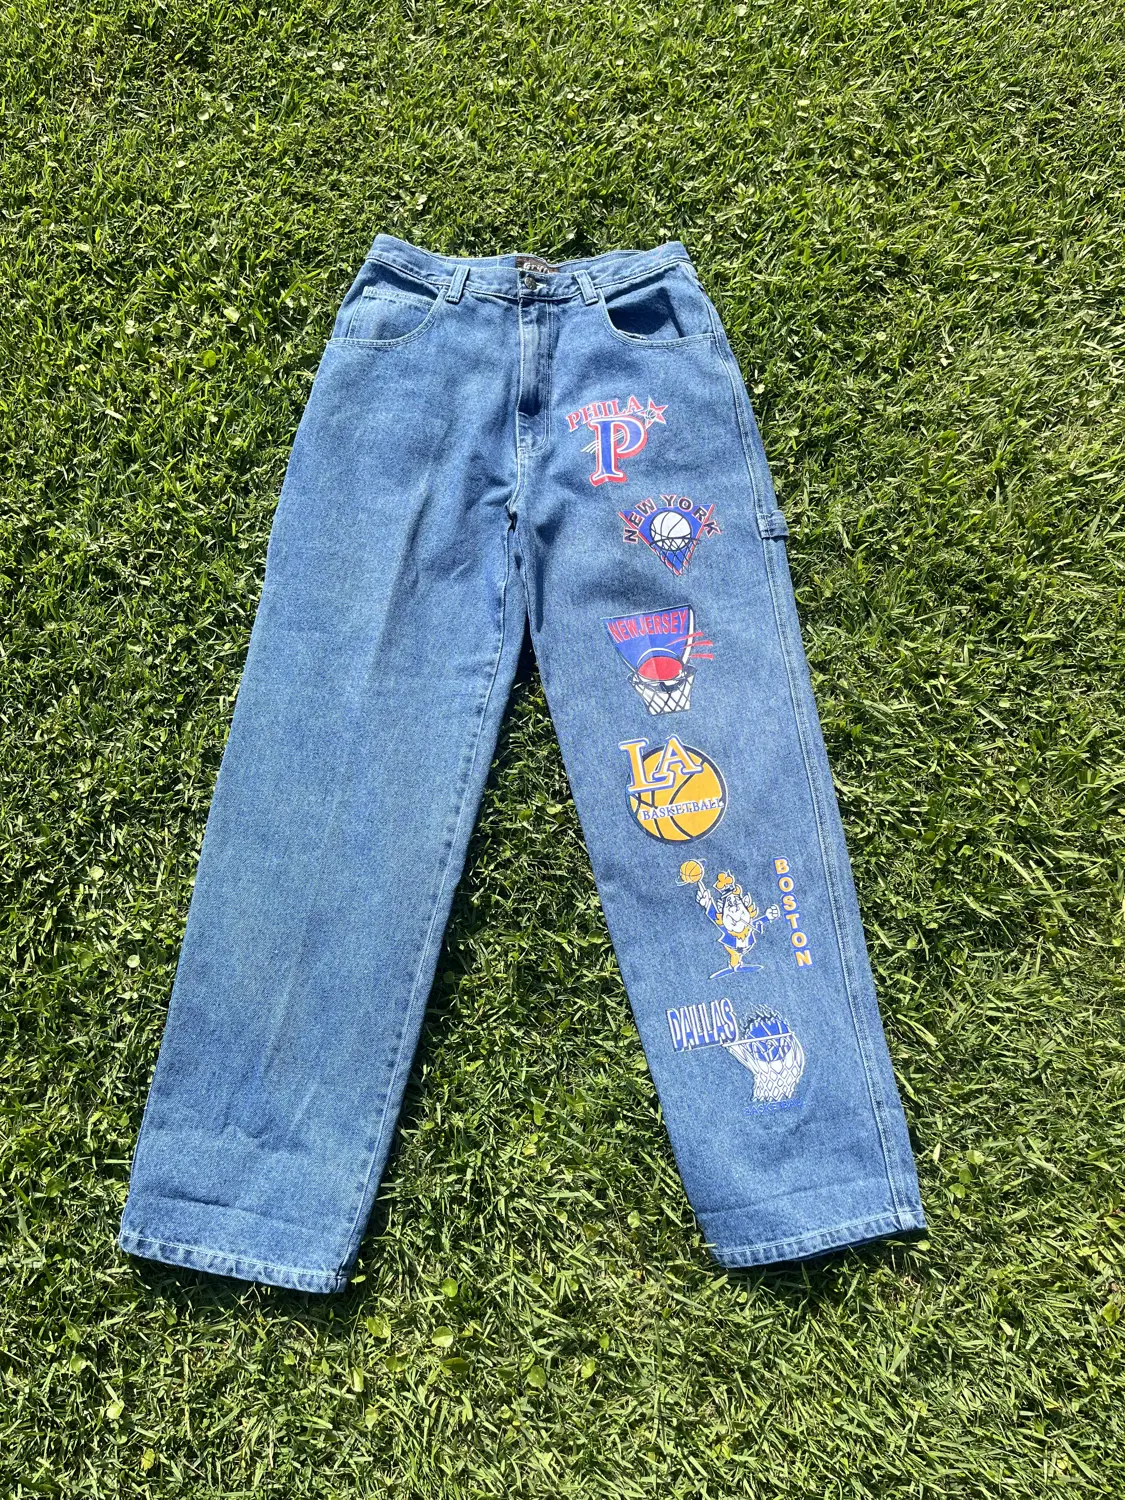 Vintage Griffin NBA worked jeans